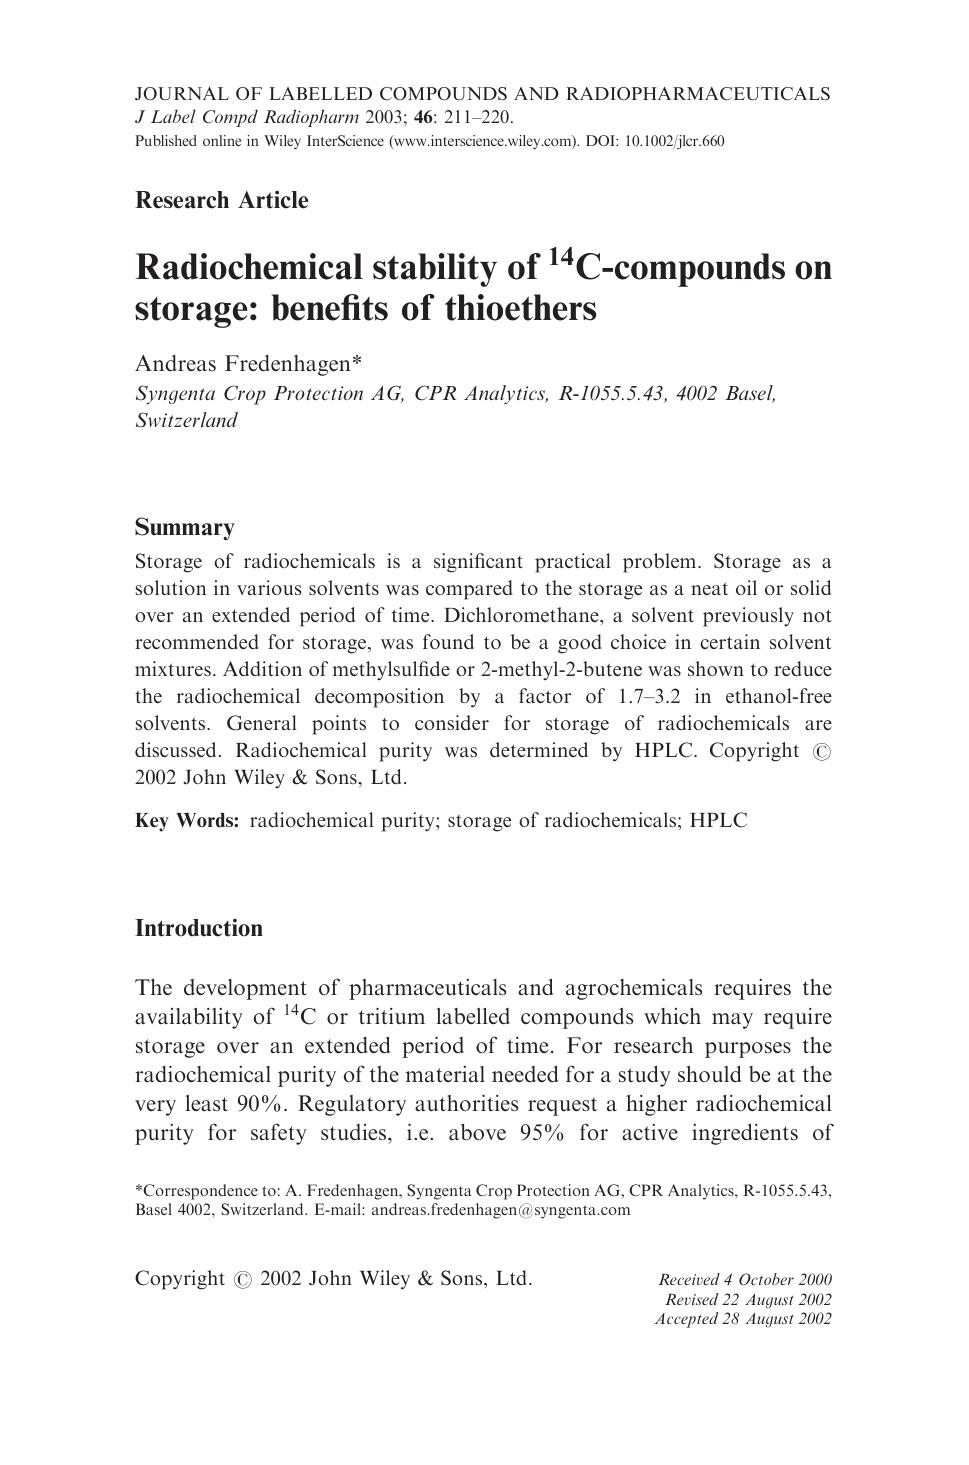 Radiochemical stability of 14C-compounds on storage: benefits of thioethers by Unknown